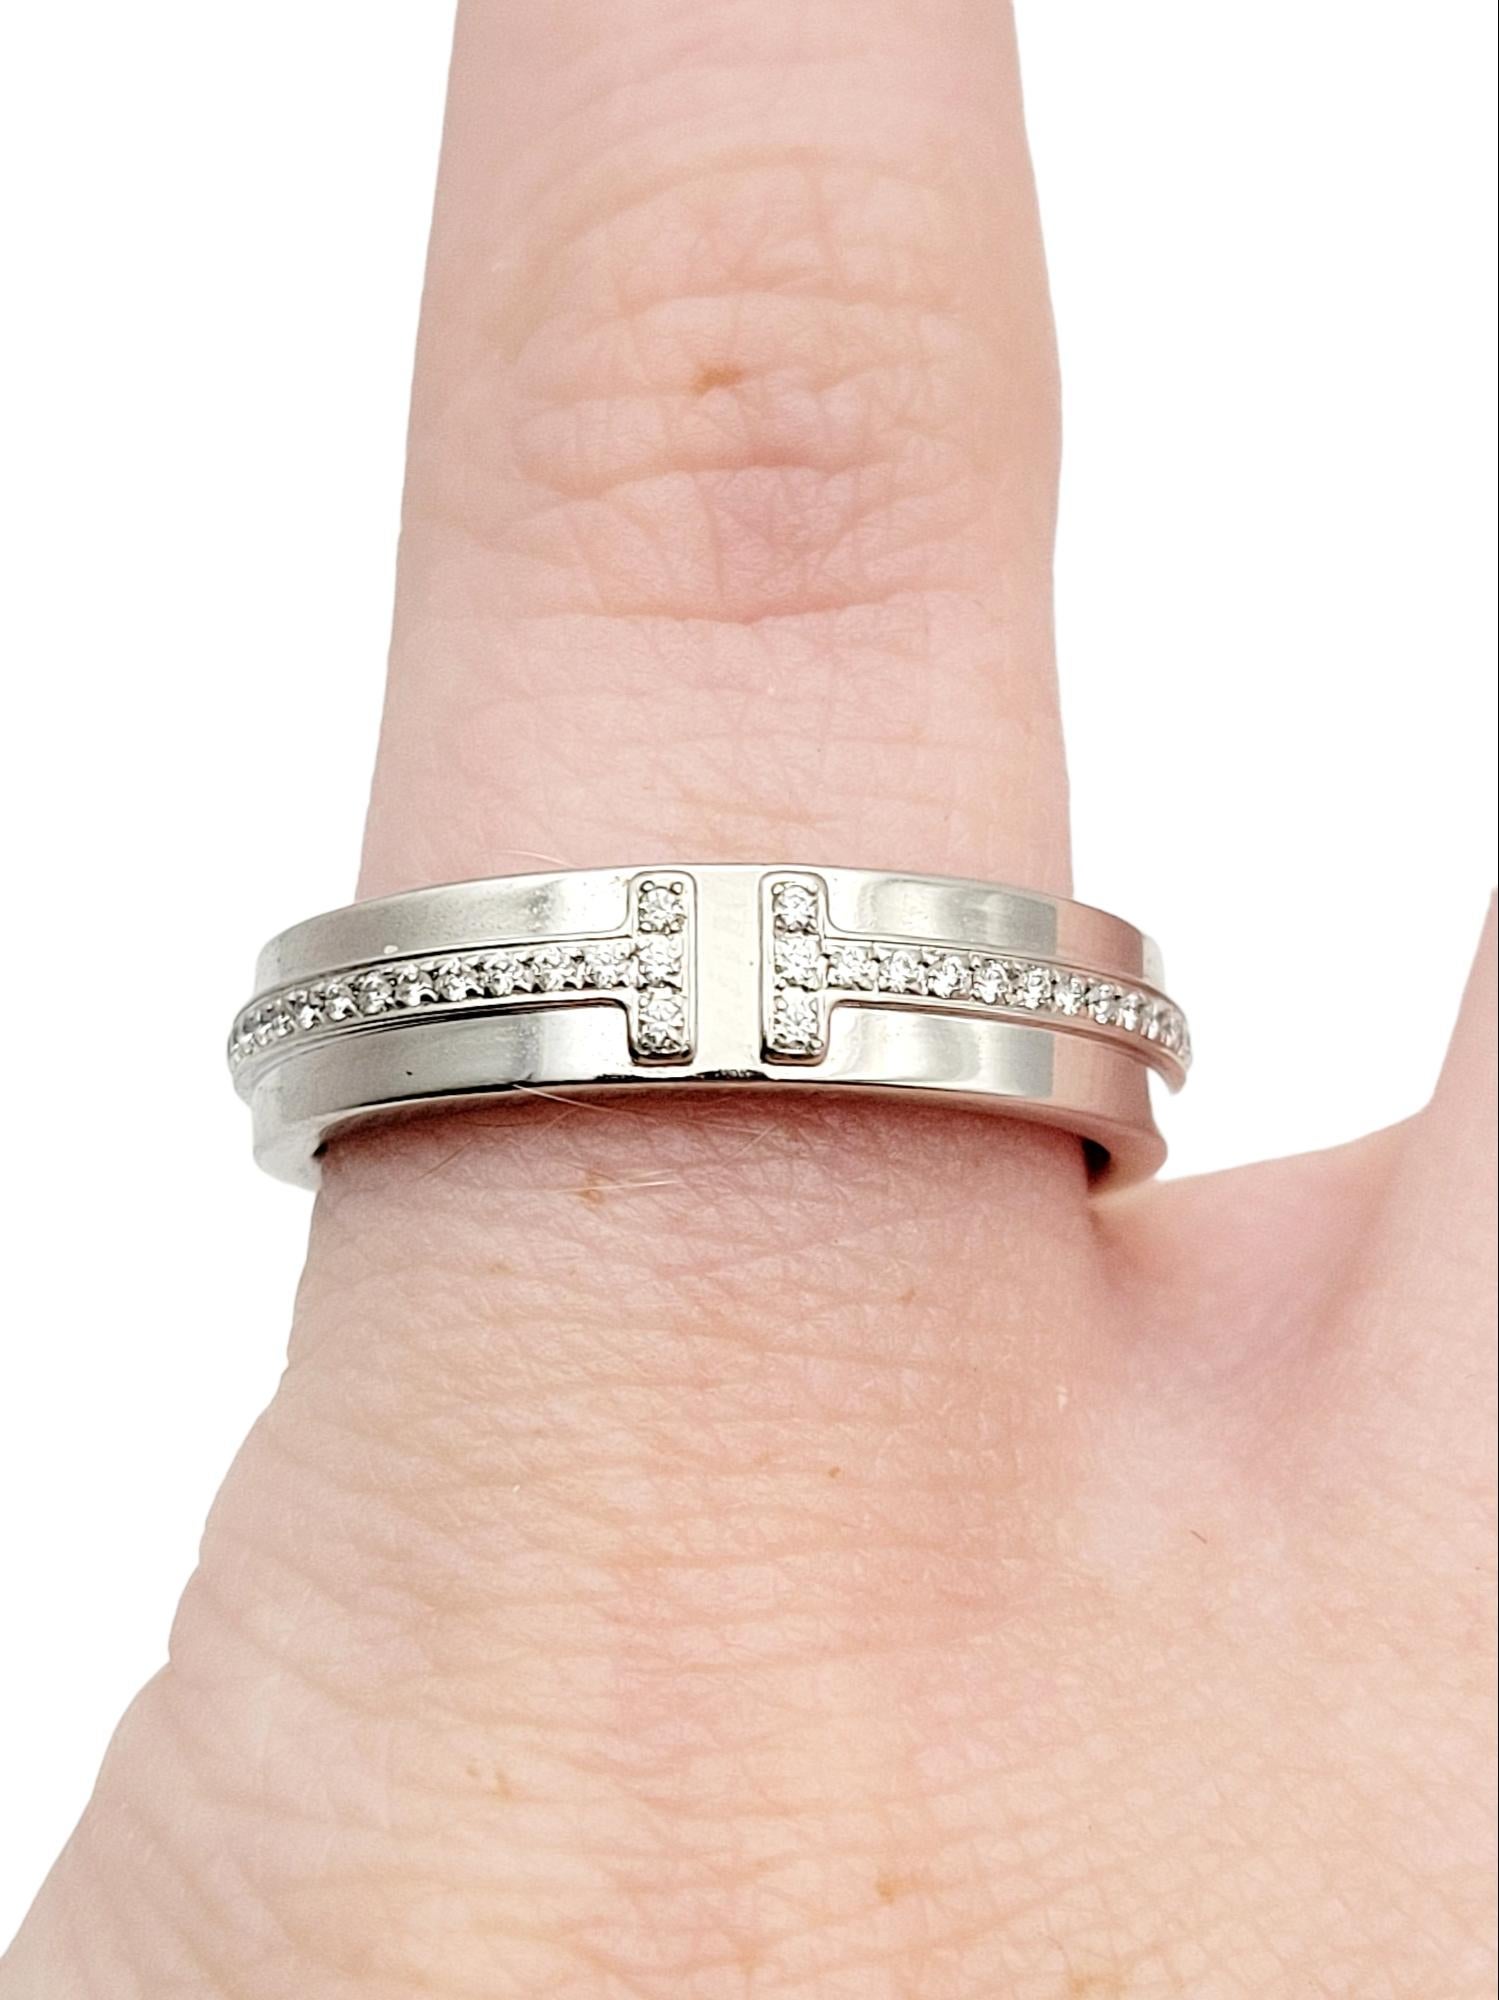 Tiffany & Co. Tiffany T Collection Narrow Diamond Ring in 18 Karat White Gold For Sale 7